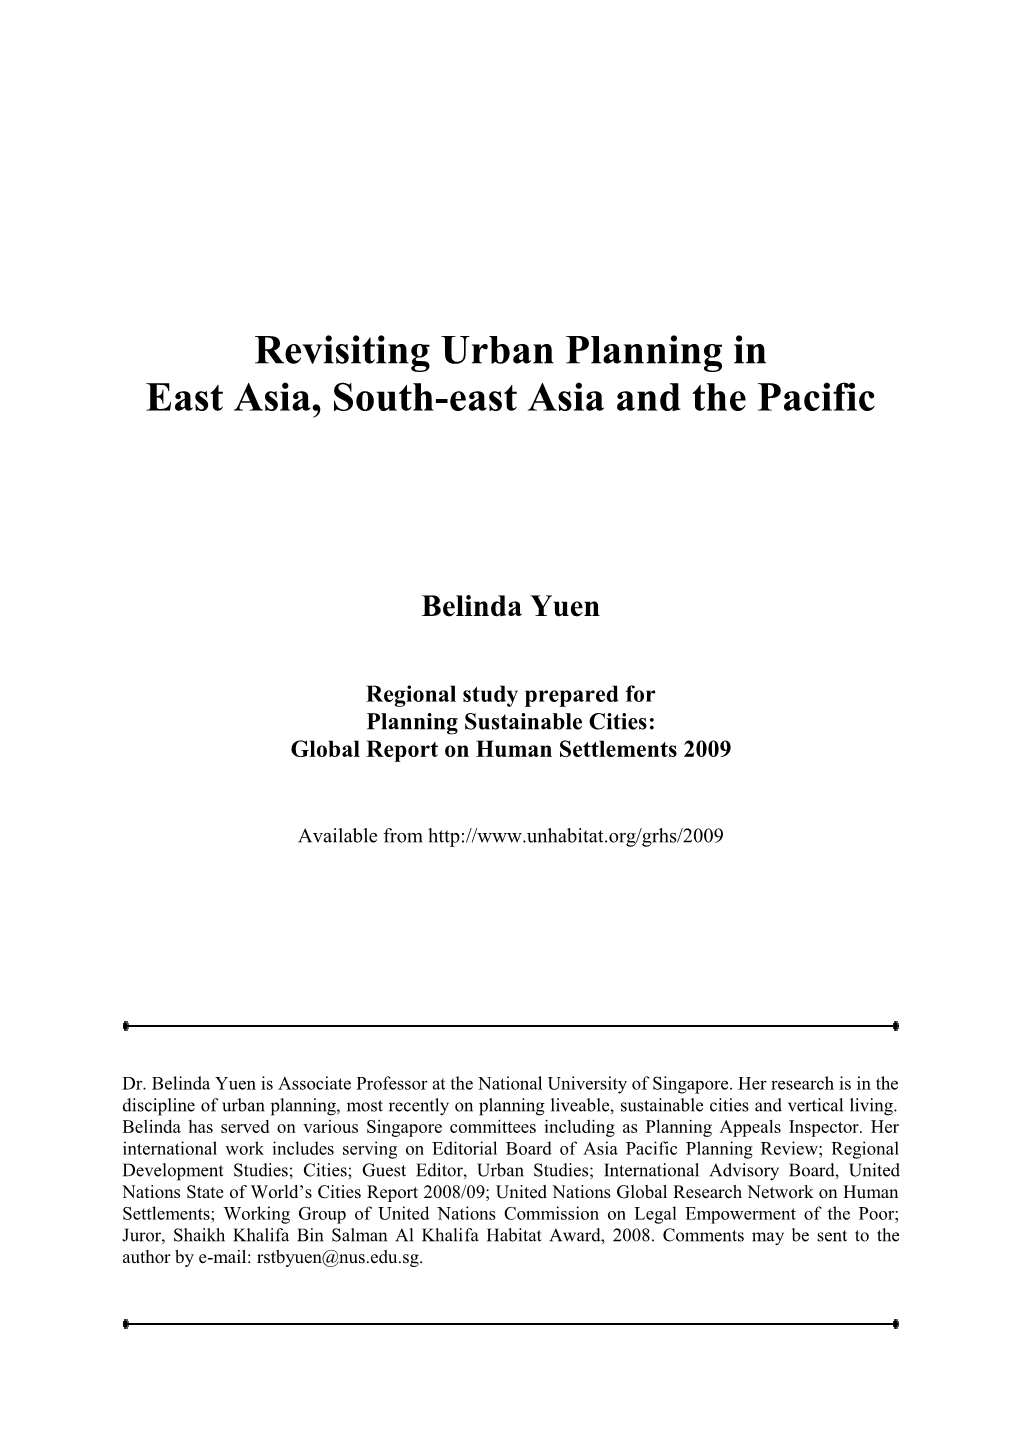 Revisiting Urban Planning in East Asia, South-East Asia and the Pacific